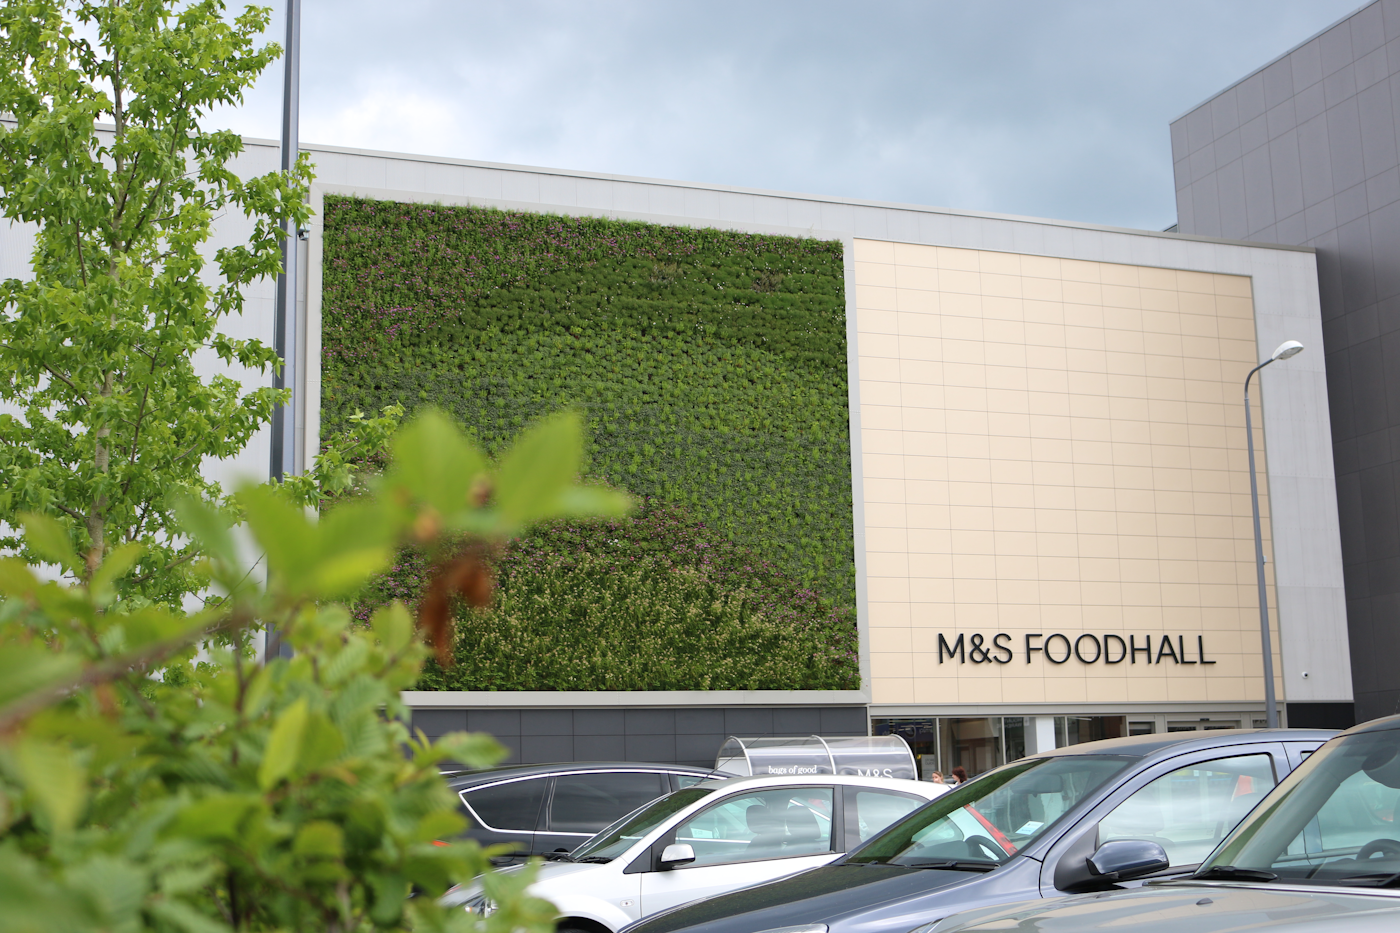 tree and living wall at a marks and spencer foodhall supermarket